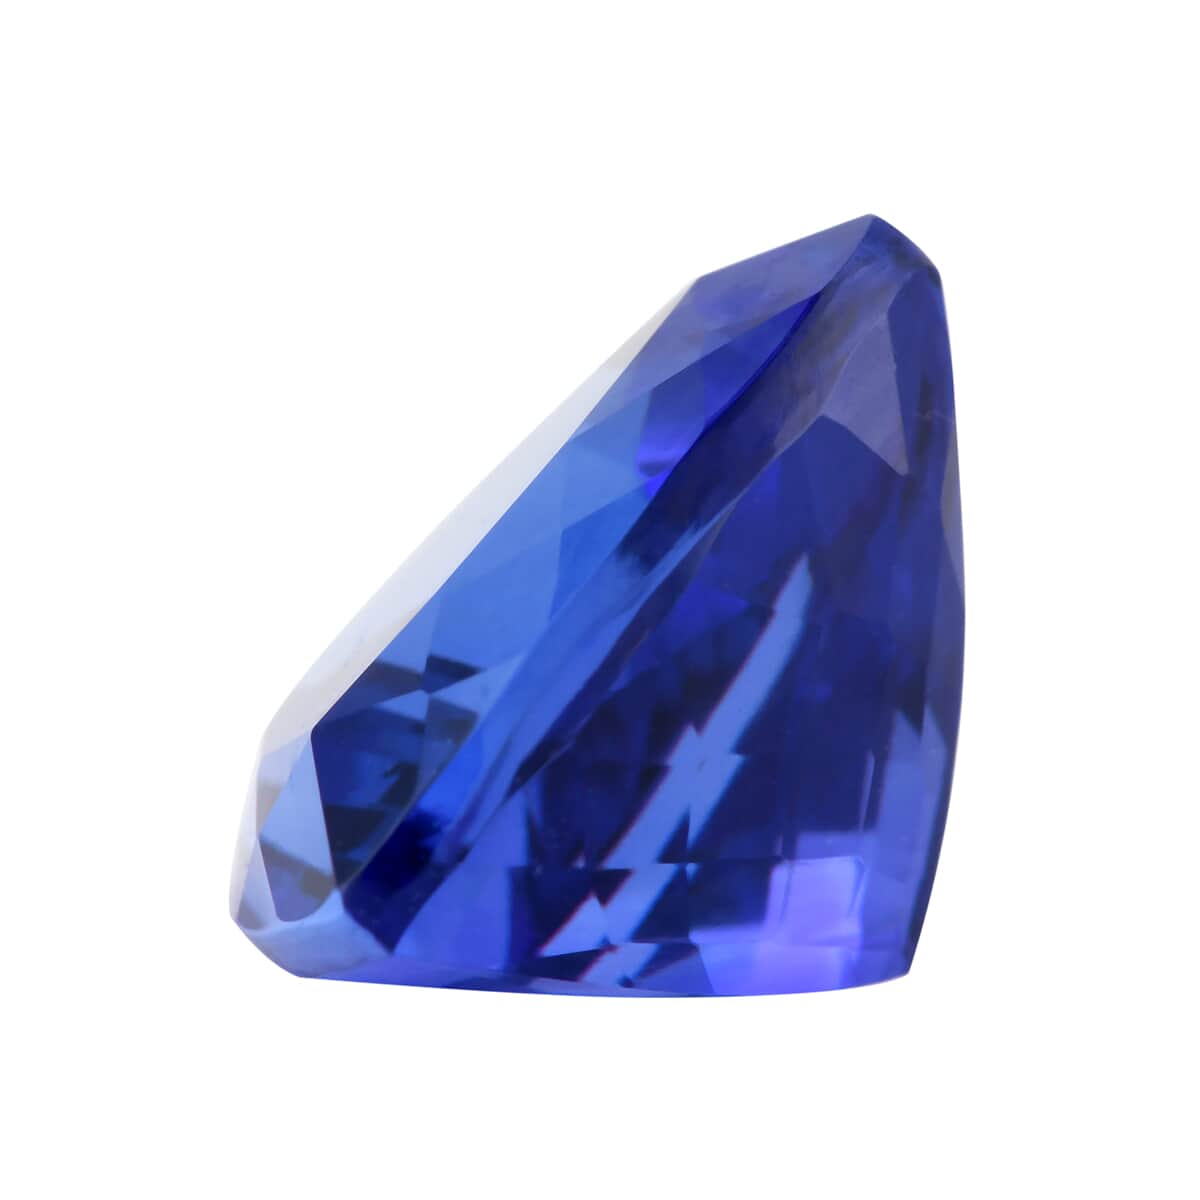 Certified and Appraised AAAA Vivid Tanzanite (Trl Free Size) 5.00 ctw, Loose Gemstone For Jewelry Making, Trillion Free Size Tanzanite Gem, Tanzanite Stone For Jewelry image number 1